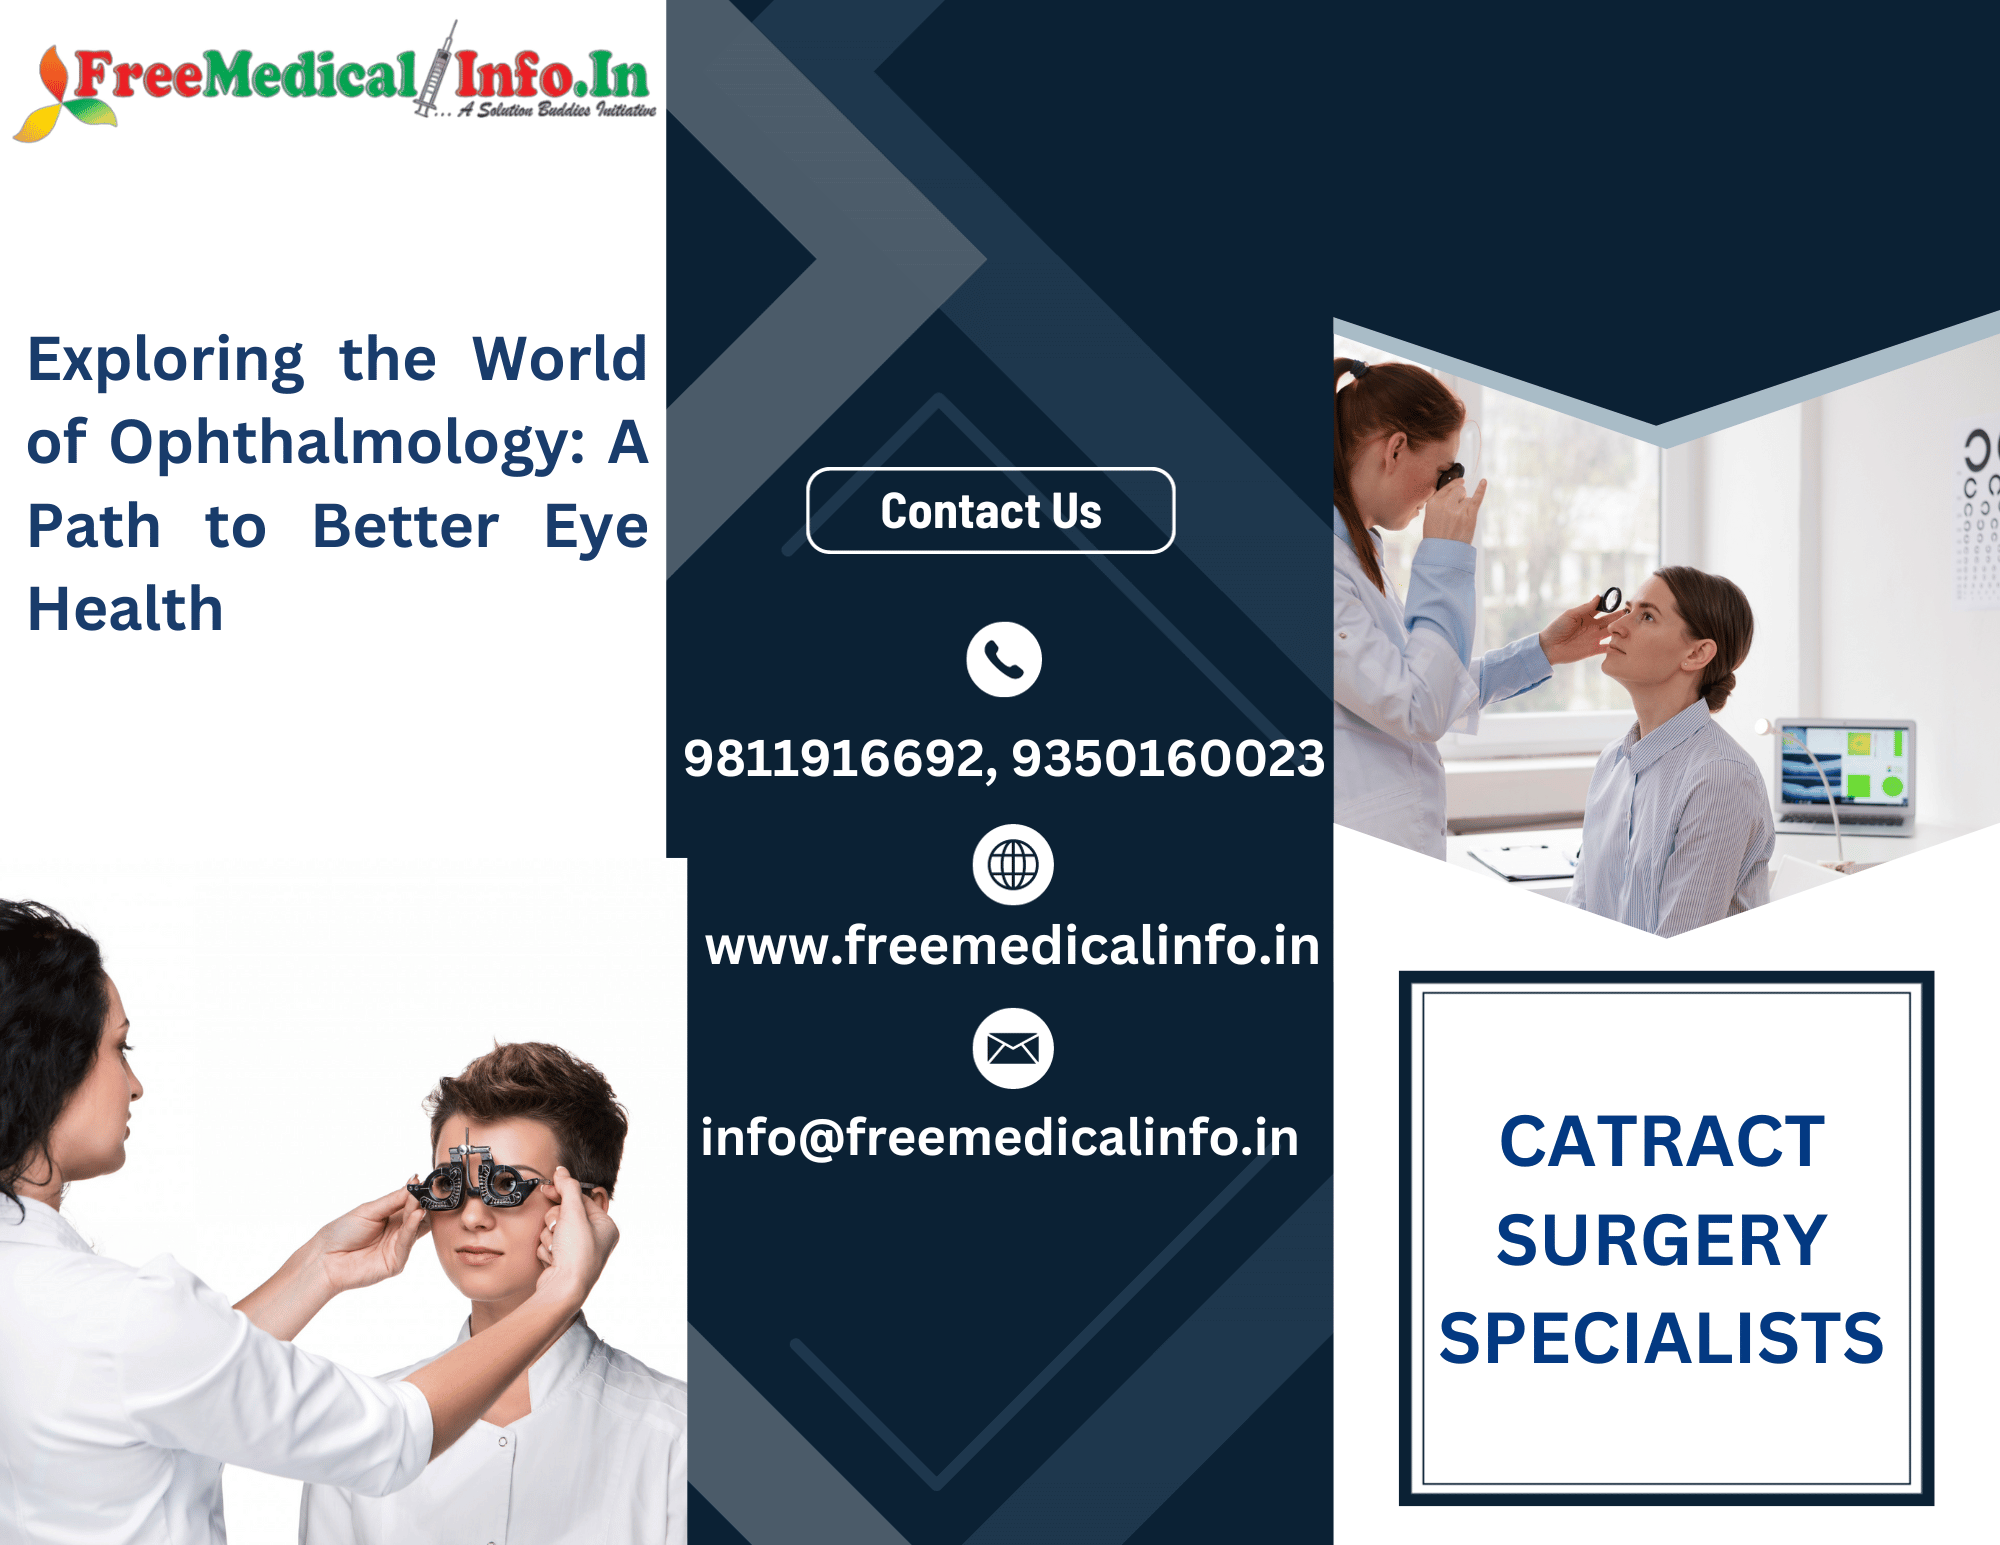 Investigate the skills of Faridabad's top 7 ophthalmology experts, who are vision care leaders. For a brighter future, learn about specialist therapies and compassionate eye care.